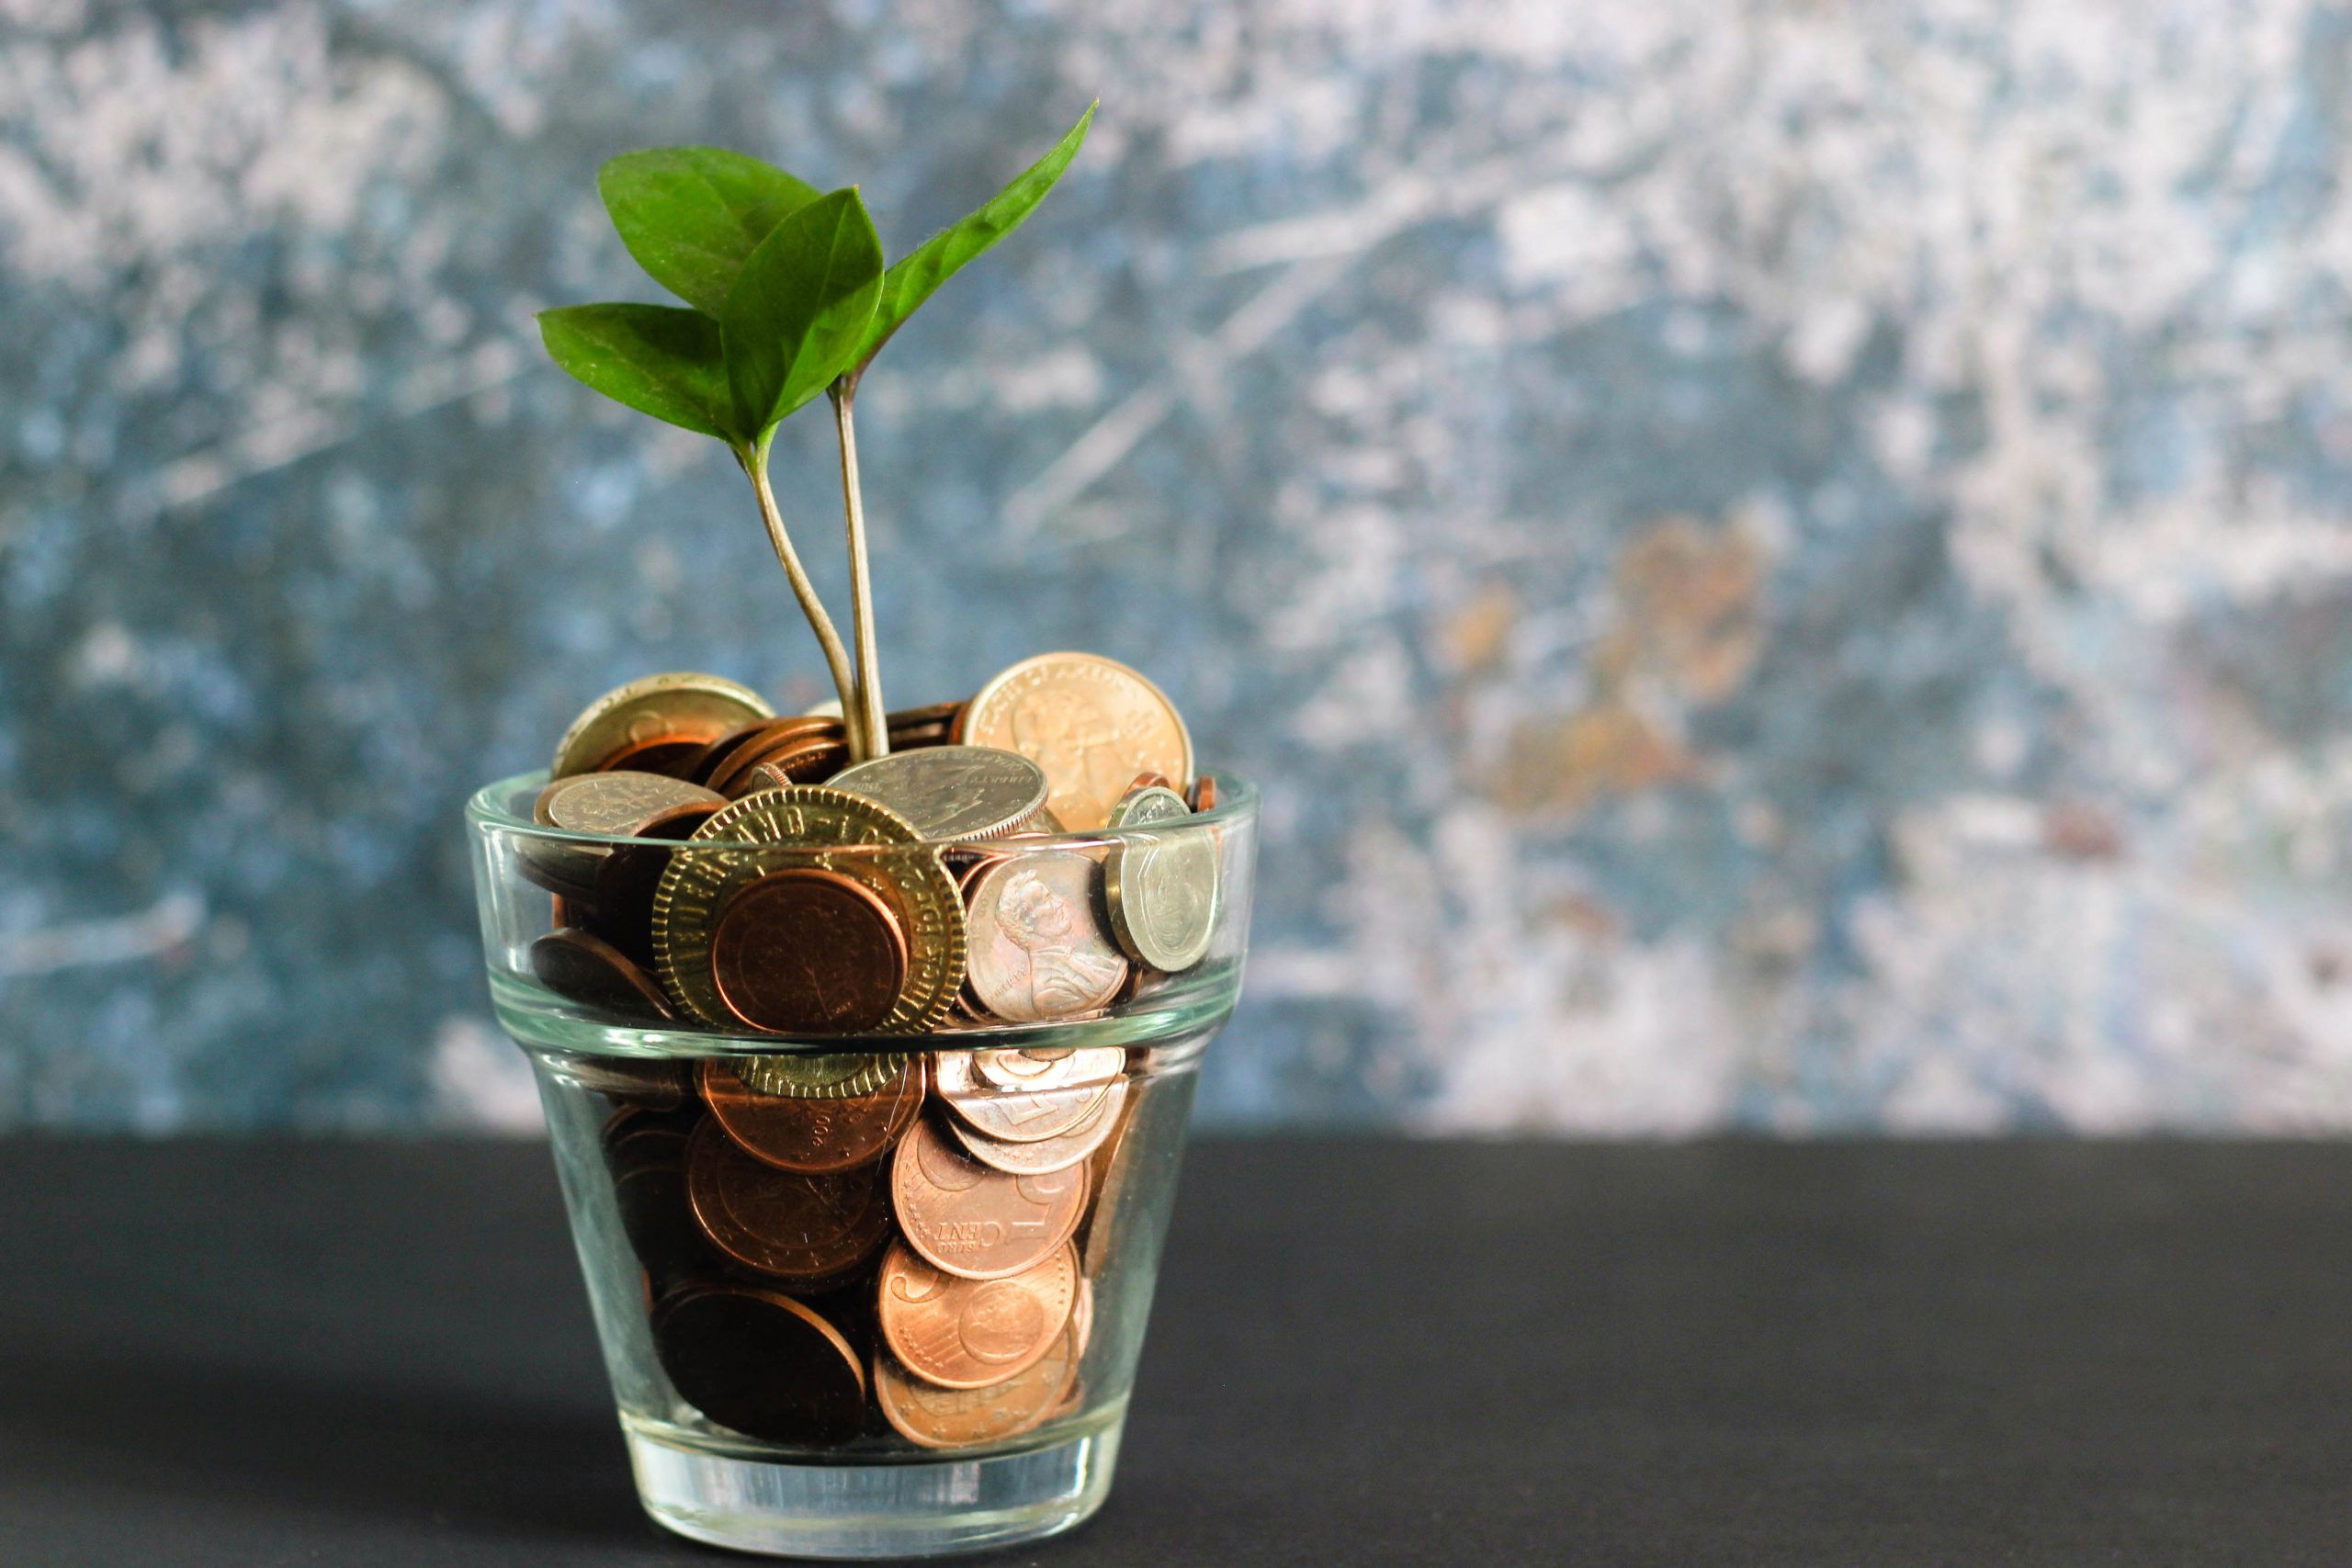 Picture of a green seedling growing out of a glass filled with money